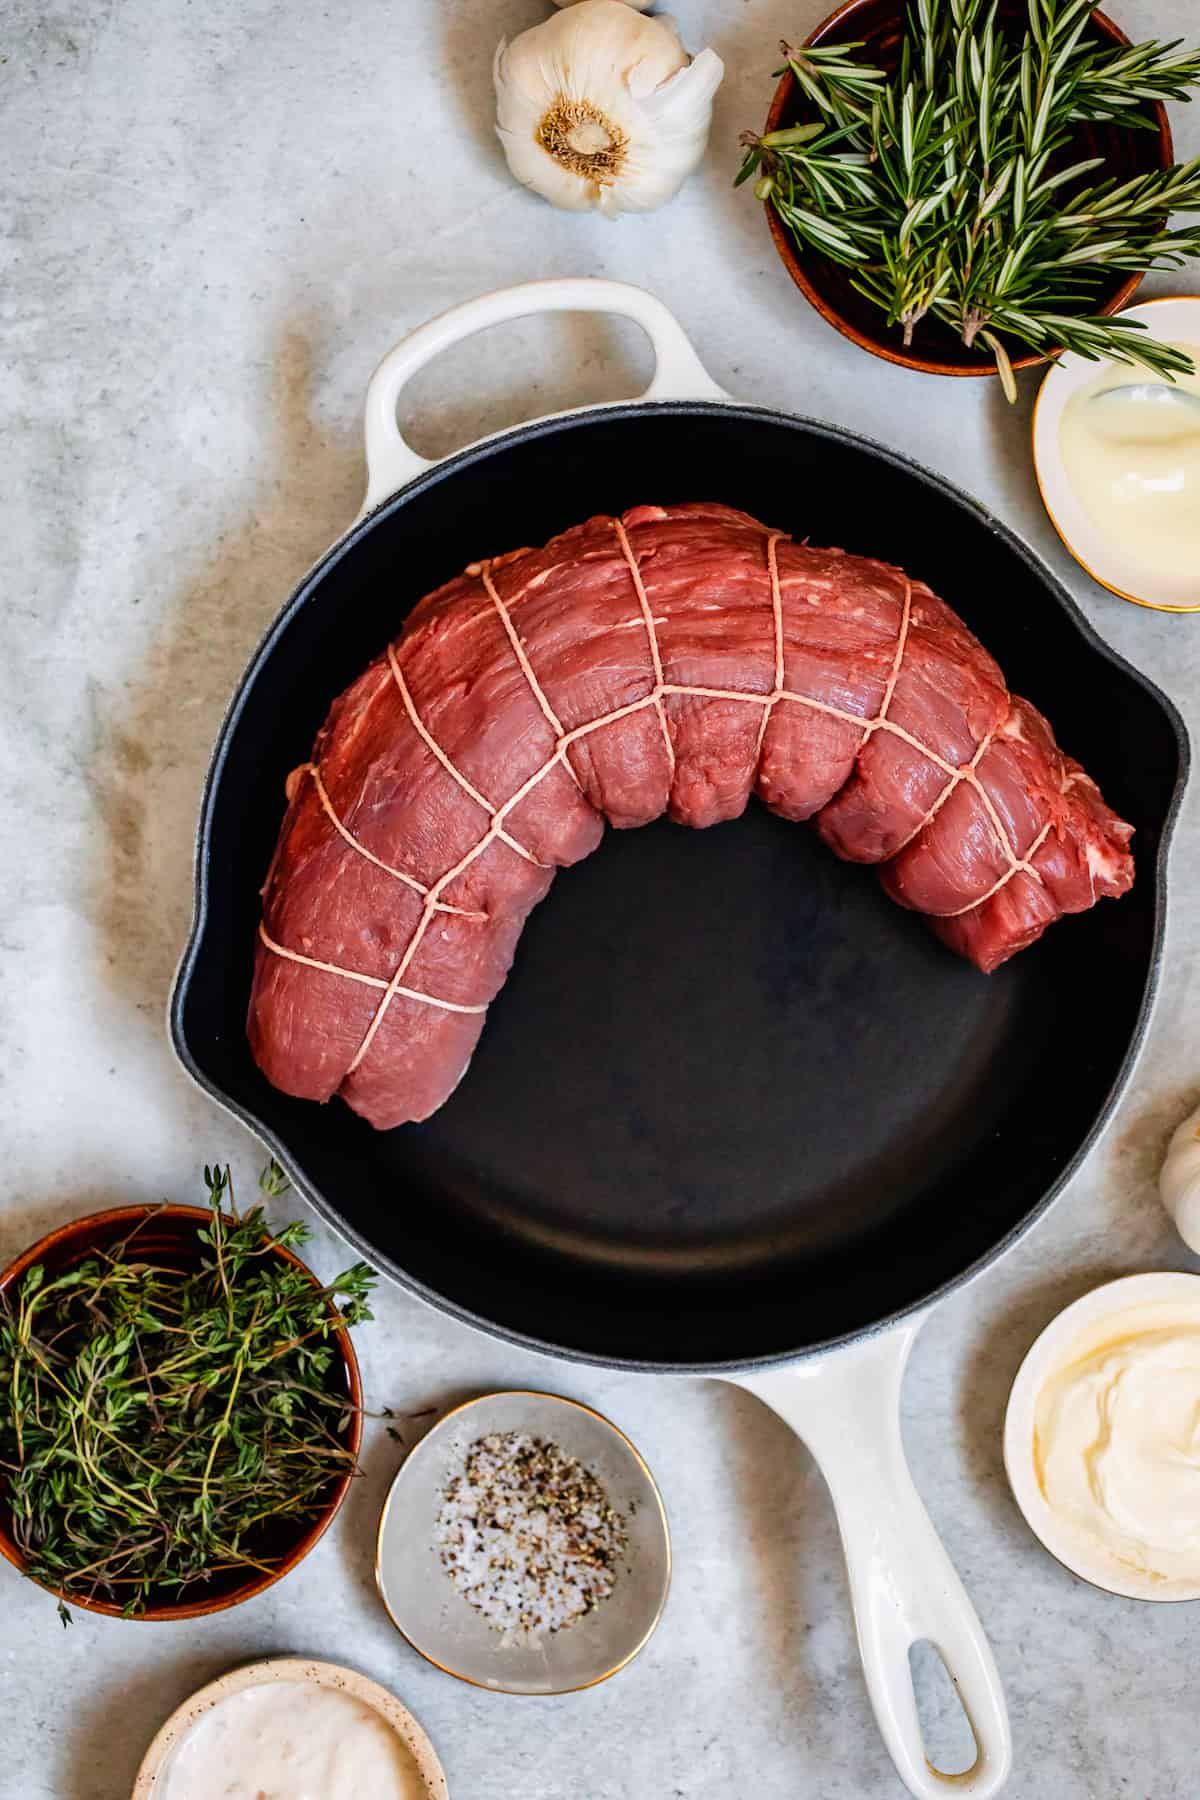 A Tied Beef Tenderloin in a Skillet Next to the Other Recipe Ingredients